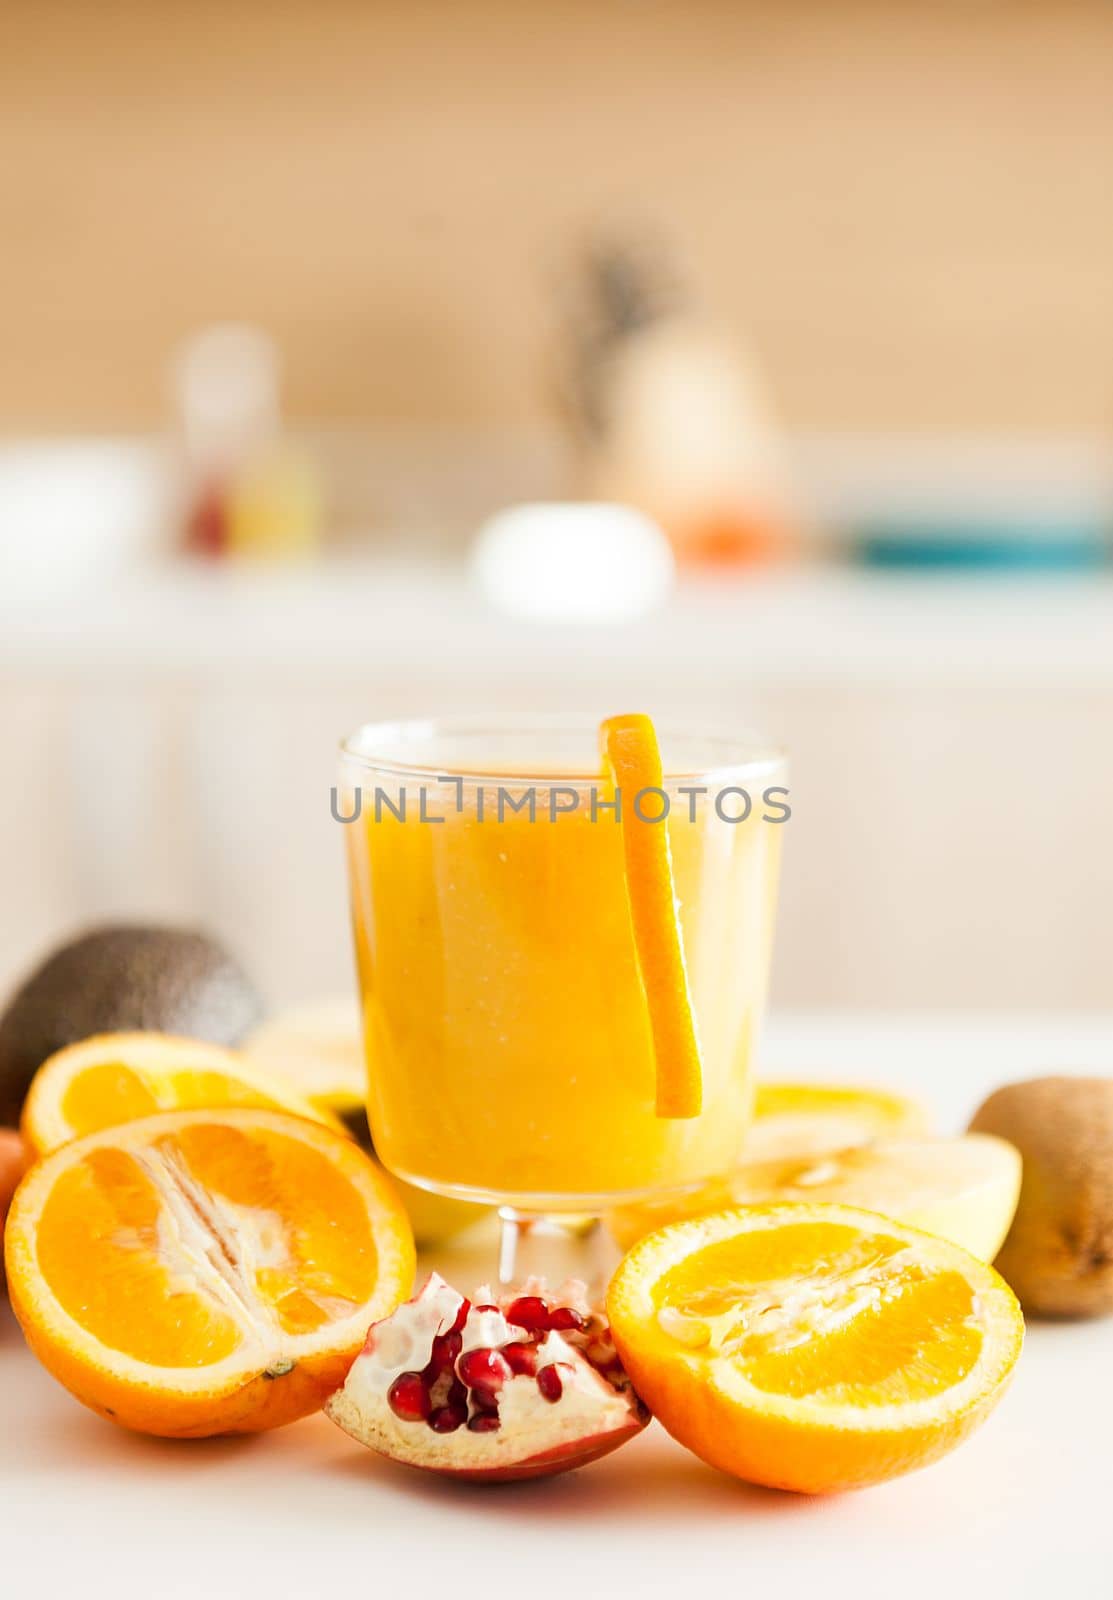 Fresh fruits, vegetables and smoothies in the kitchen by DCStudio